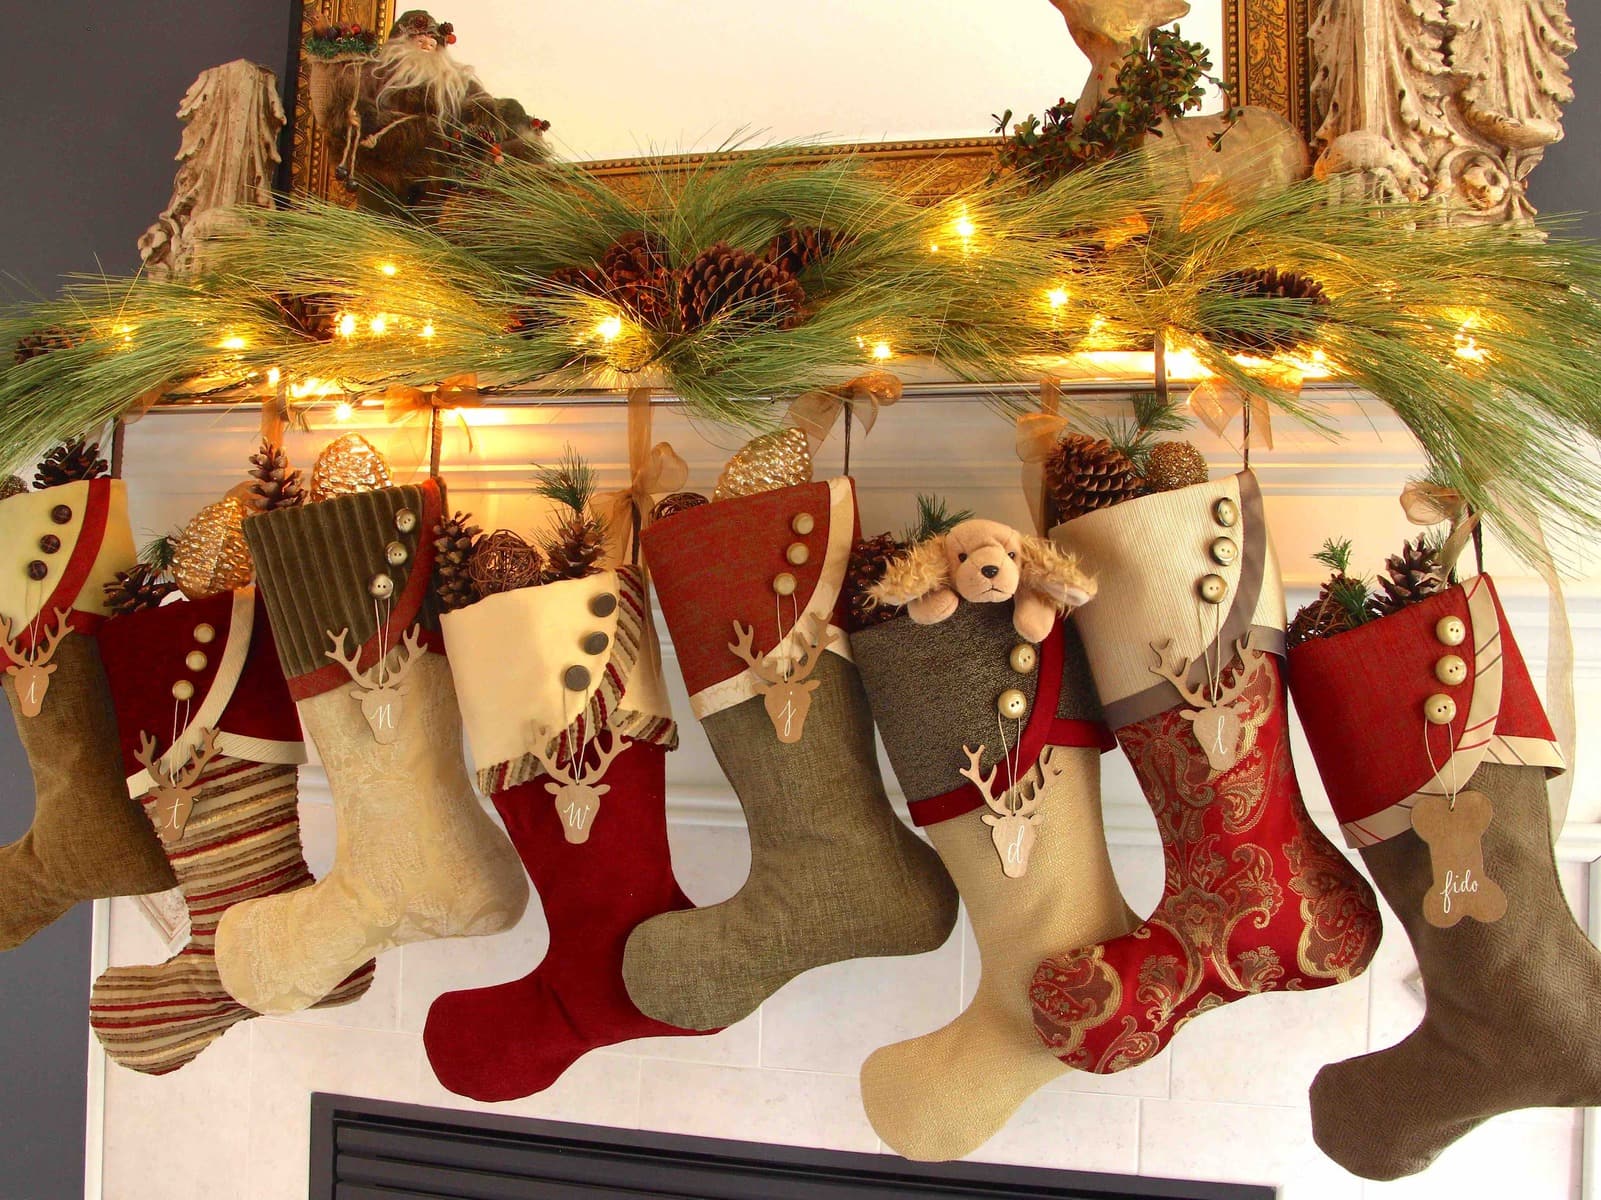 8 Christmas stockings hanging at staggered heights from stocking rod